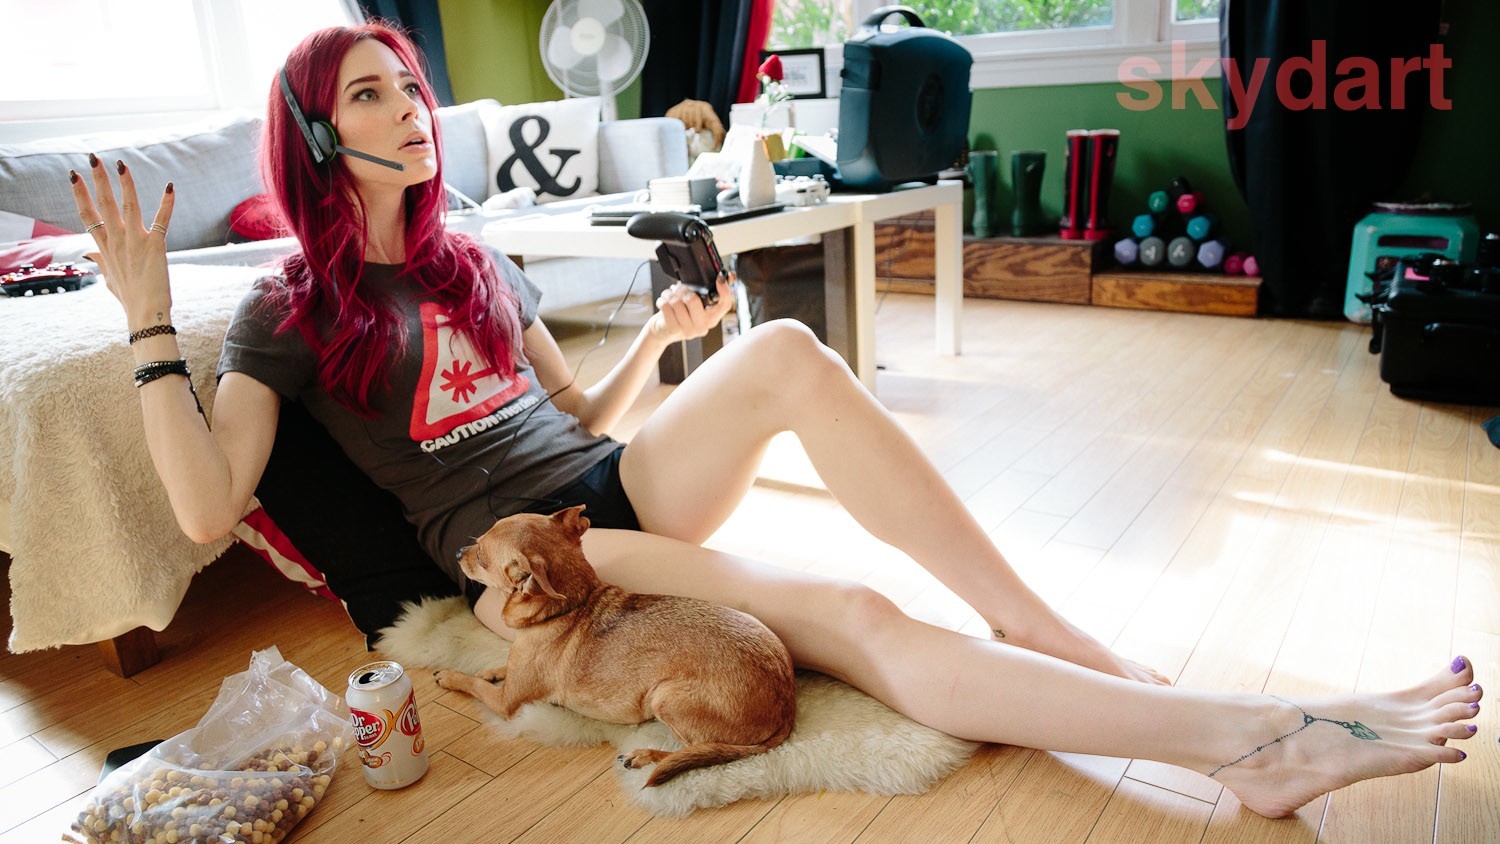 Gamer girl playing with